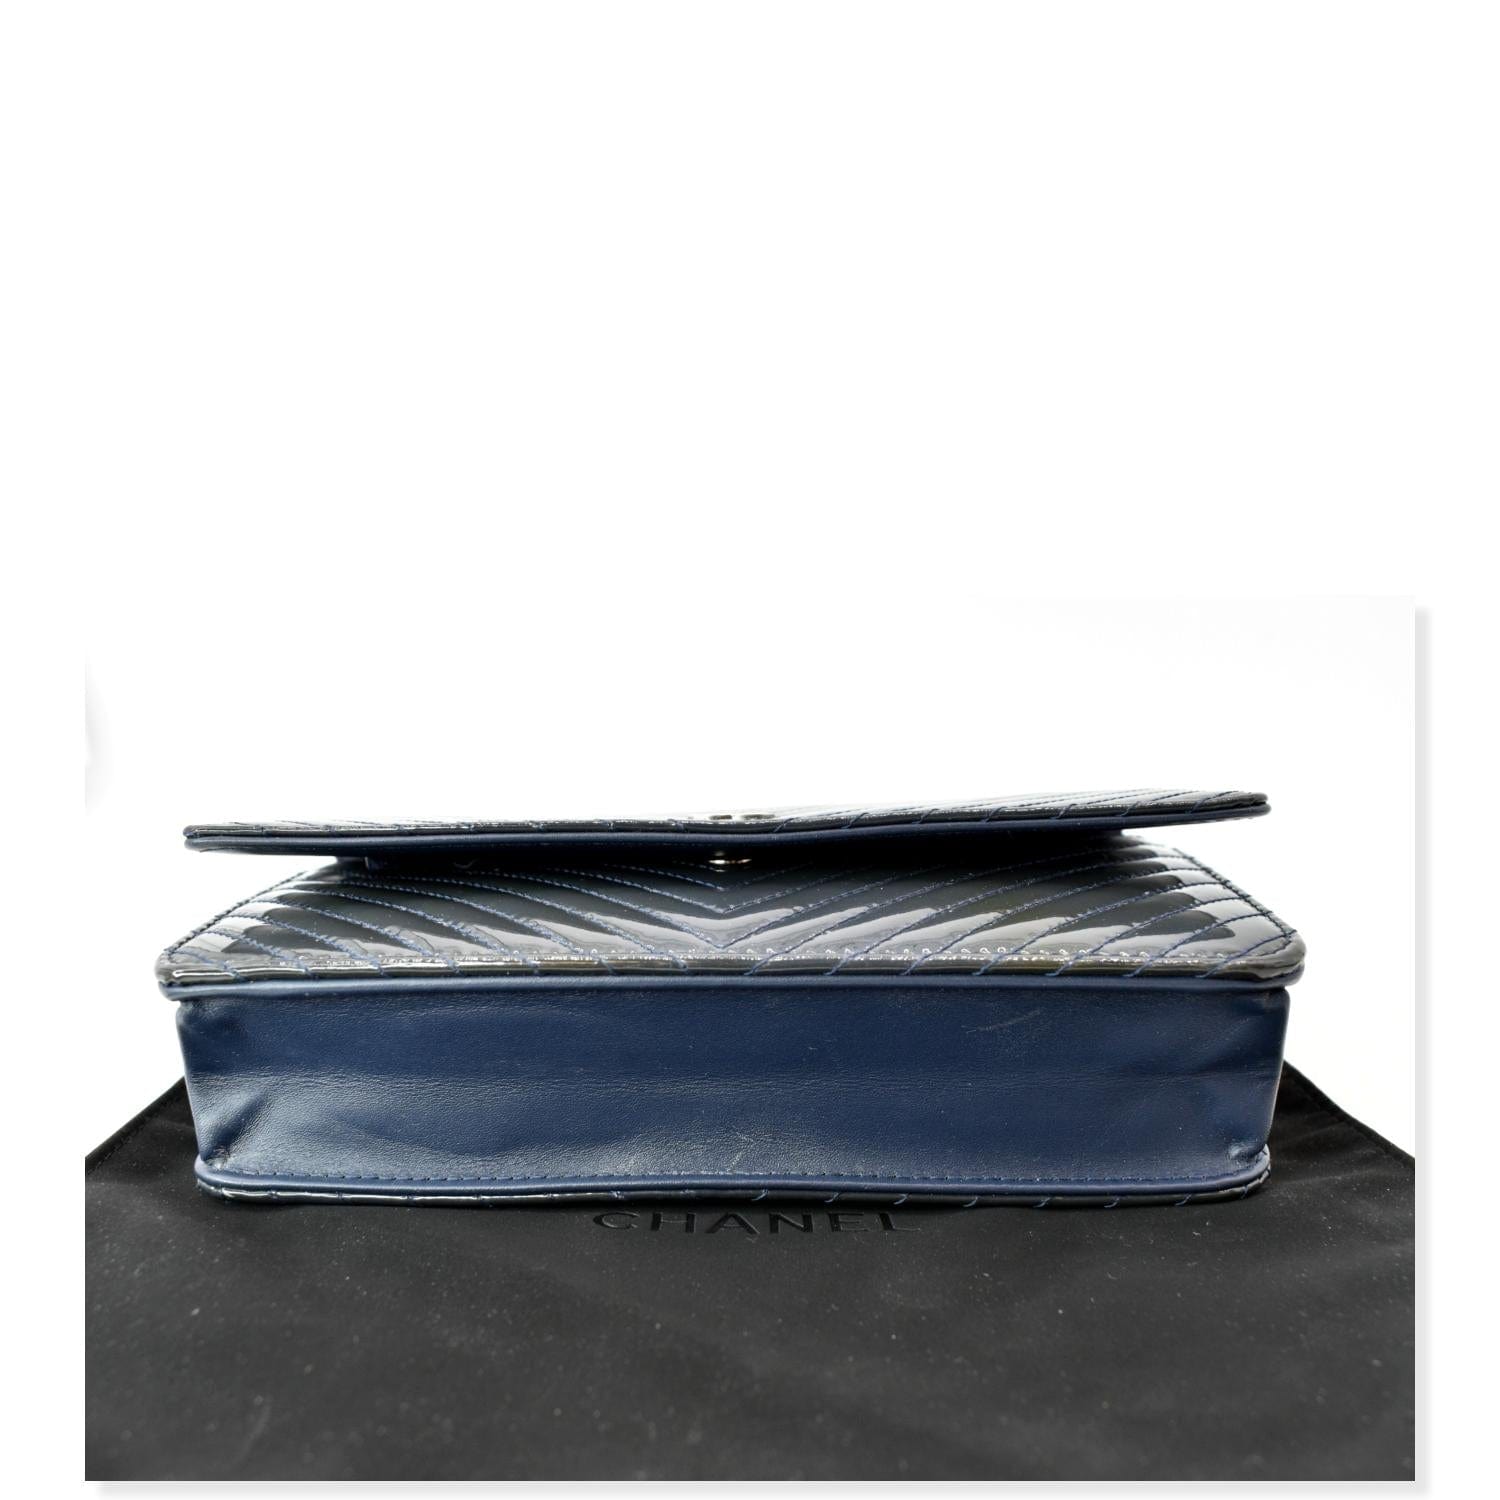 Chanel Blue Quilted Patent Leather Classic Woc Clutch Bag